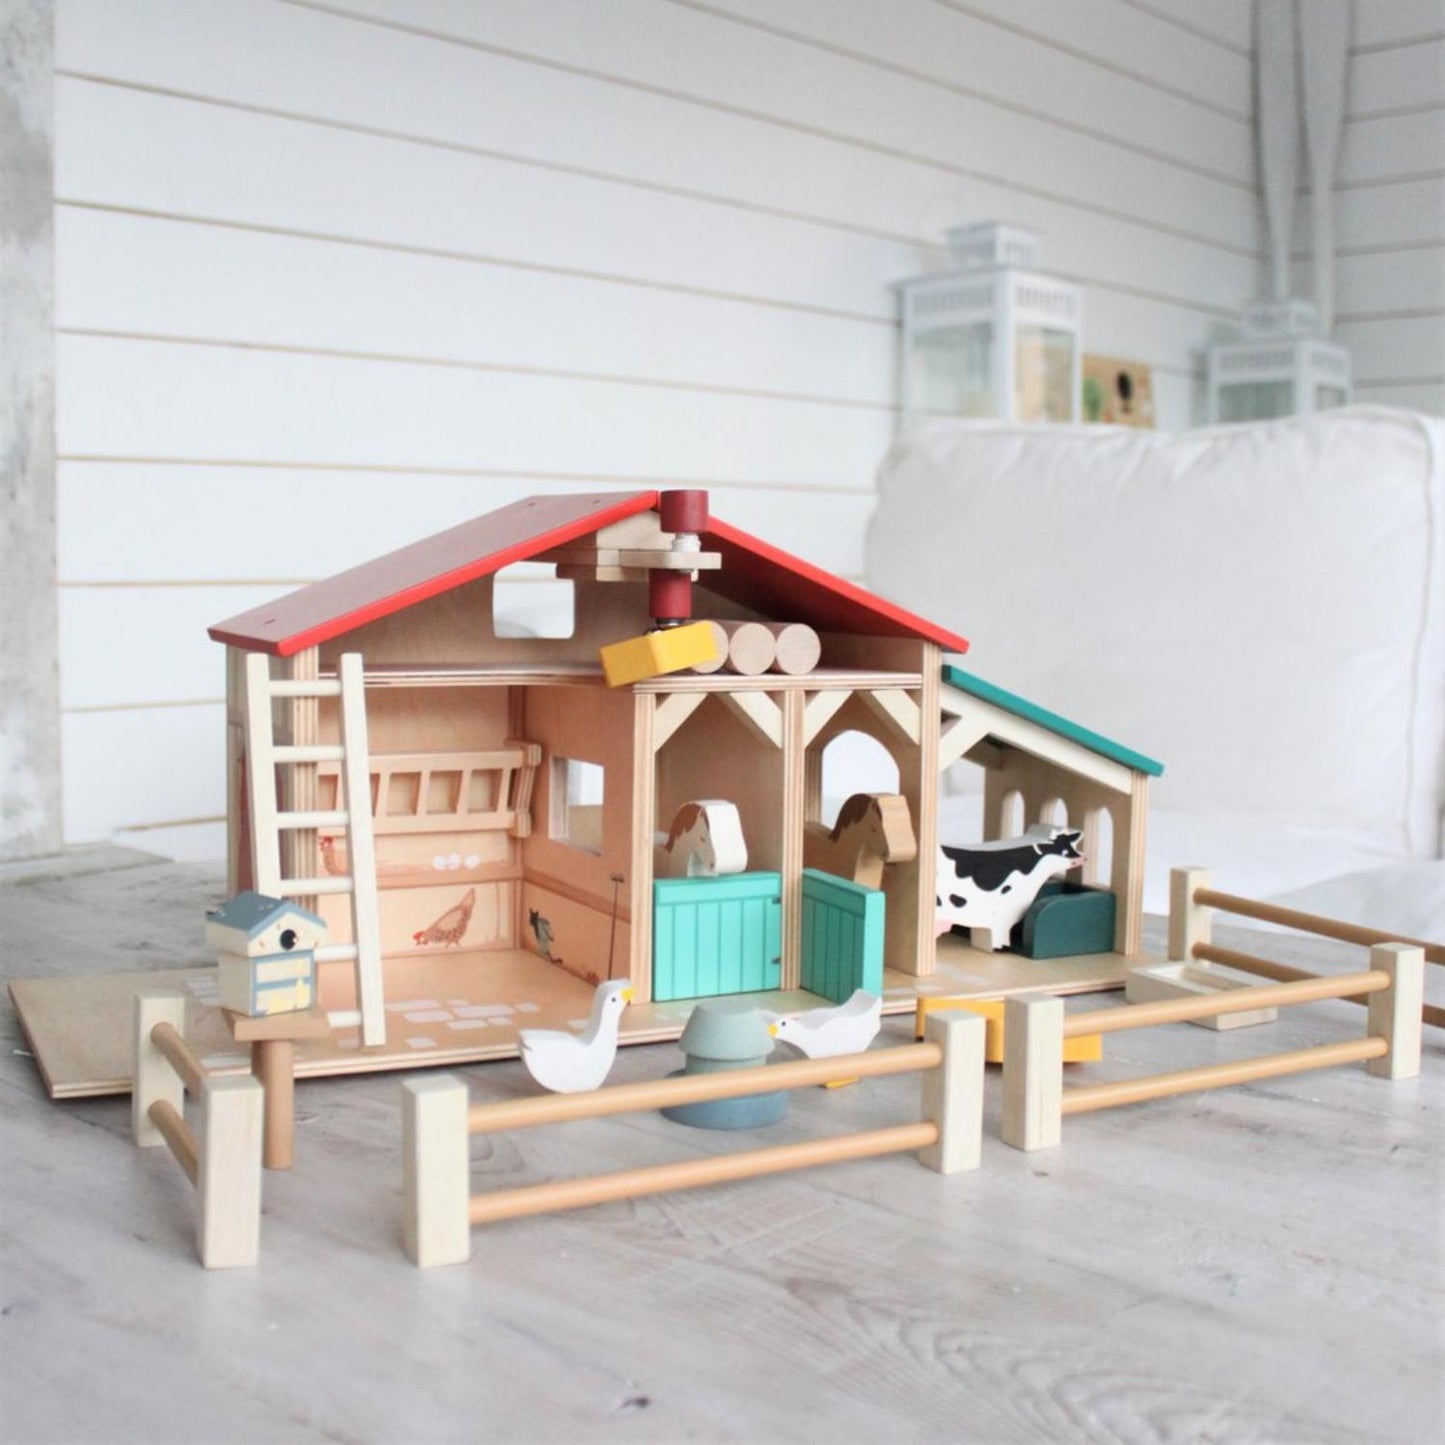 Tender Leaf Toys Wooden Farm | Wooden Toy Play Set For Kids | Lifestyle – Farm Play Set on Table Outdoors | BeoVERDE.ie